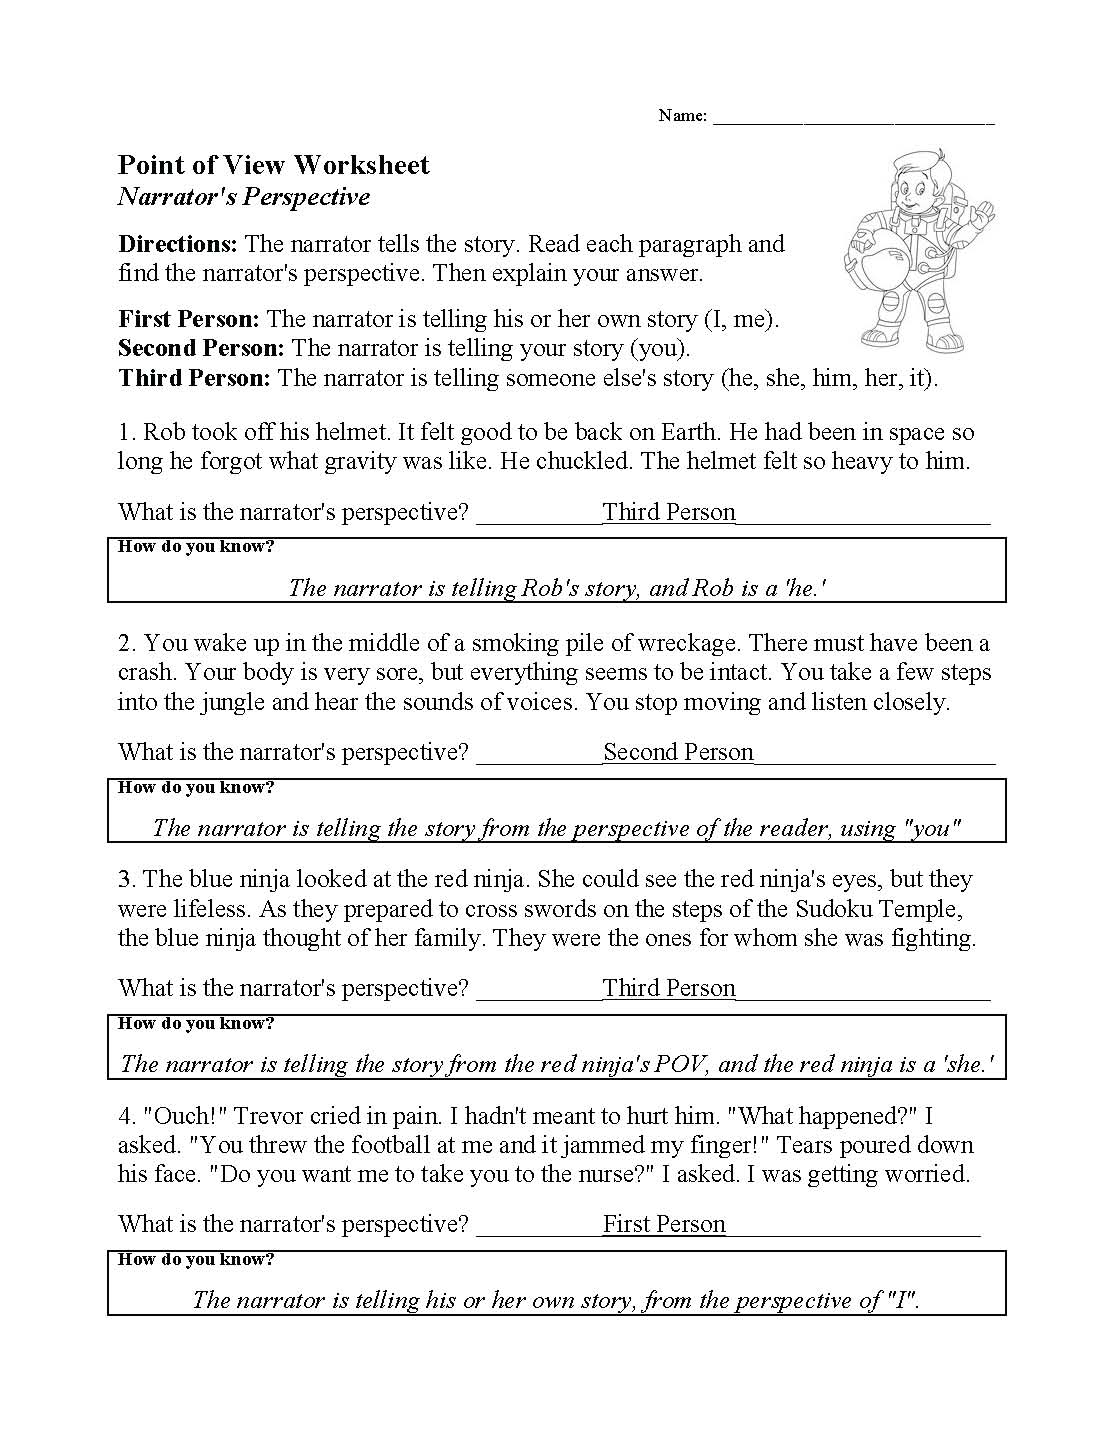 This is a preview image of our Point of View Worksheet. Click on it to enlarge this image and view the source file.